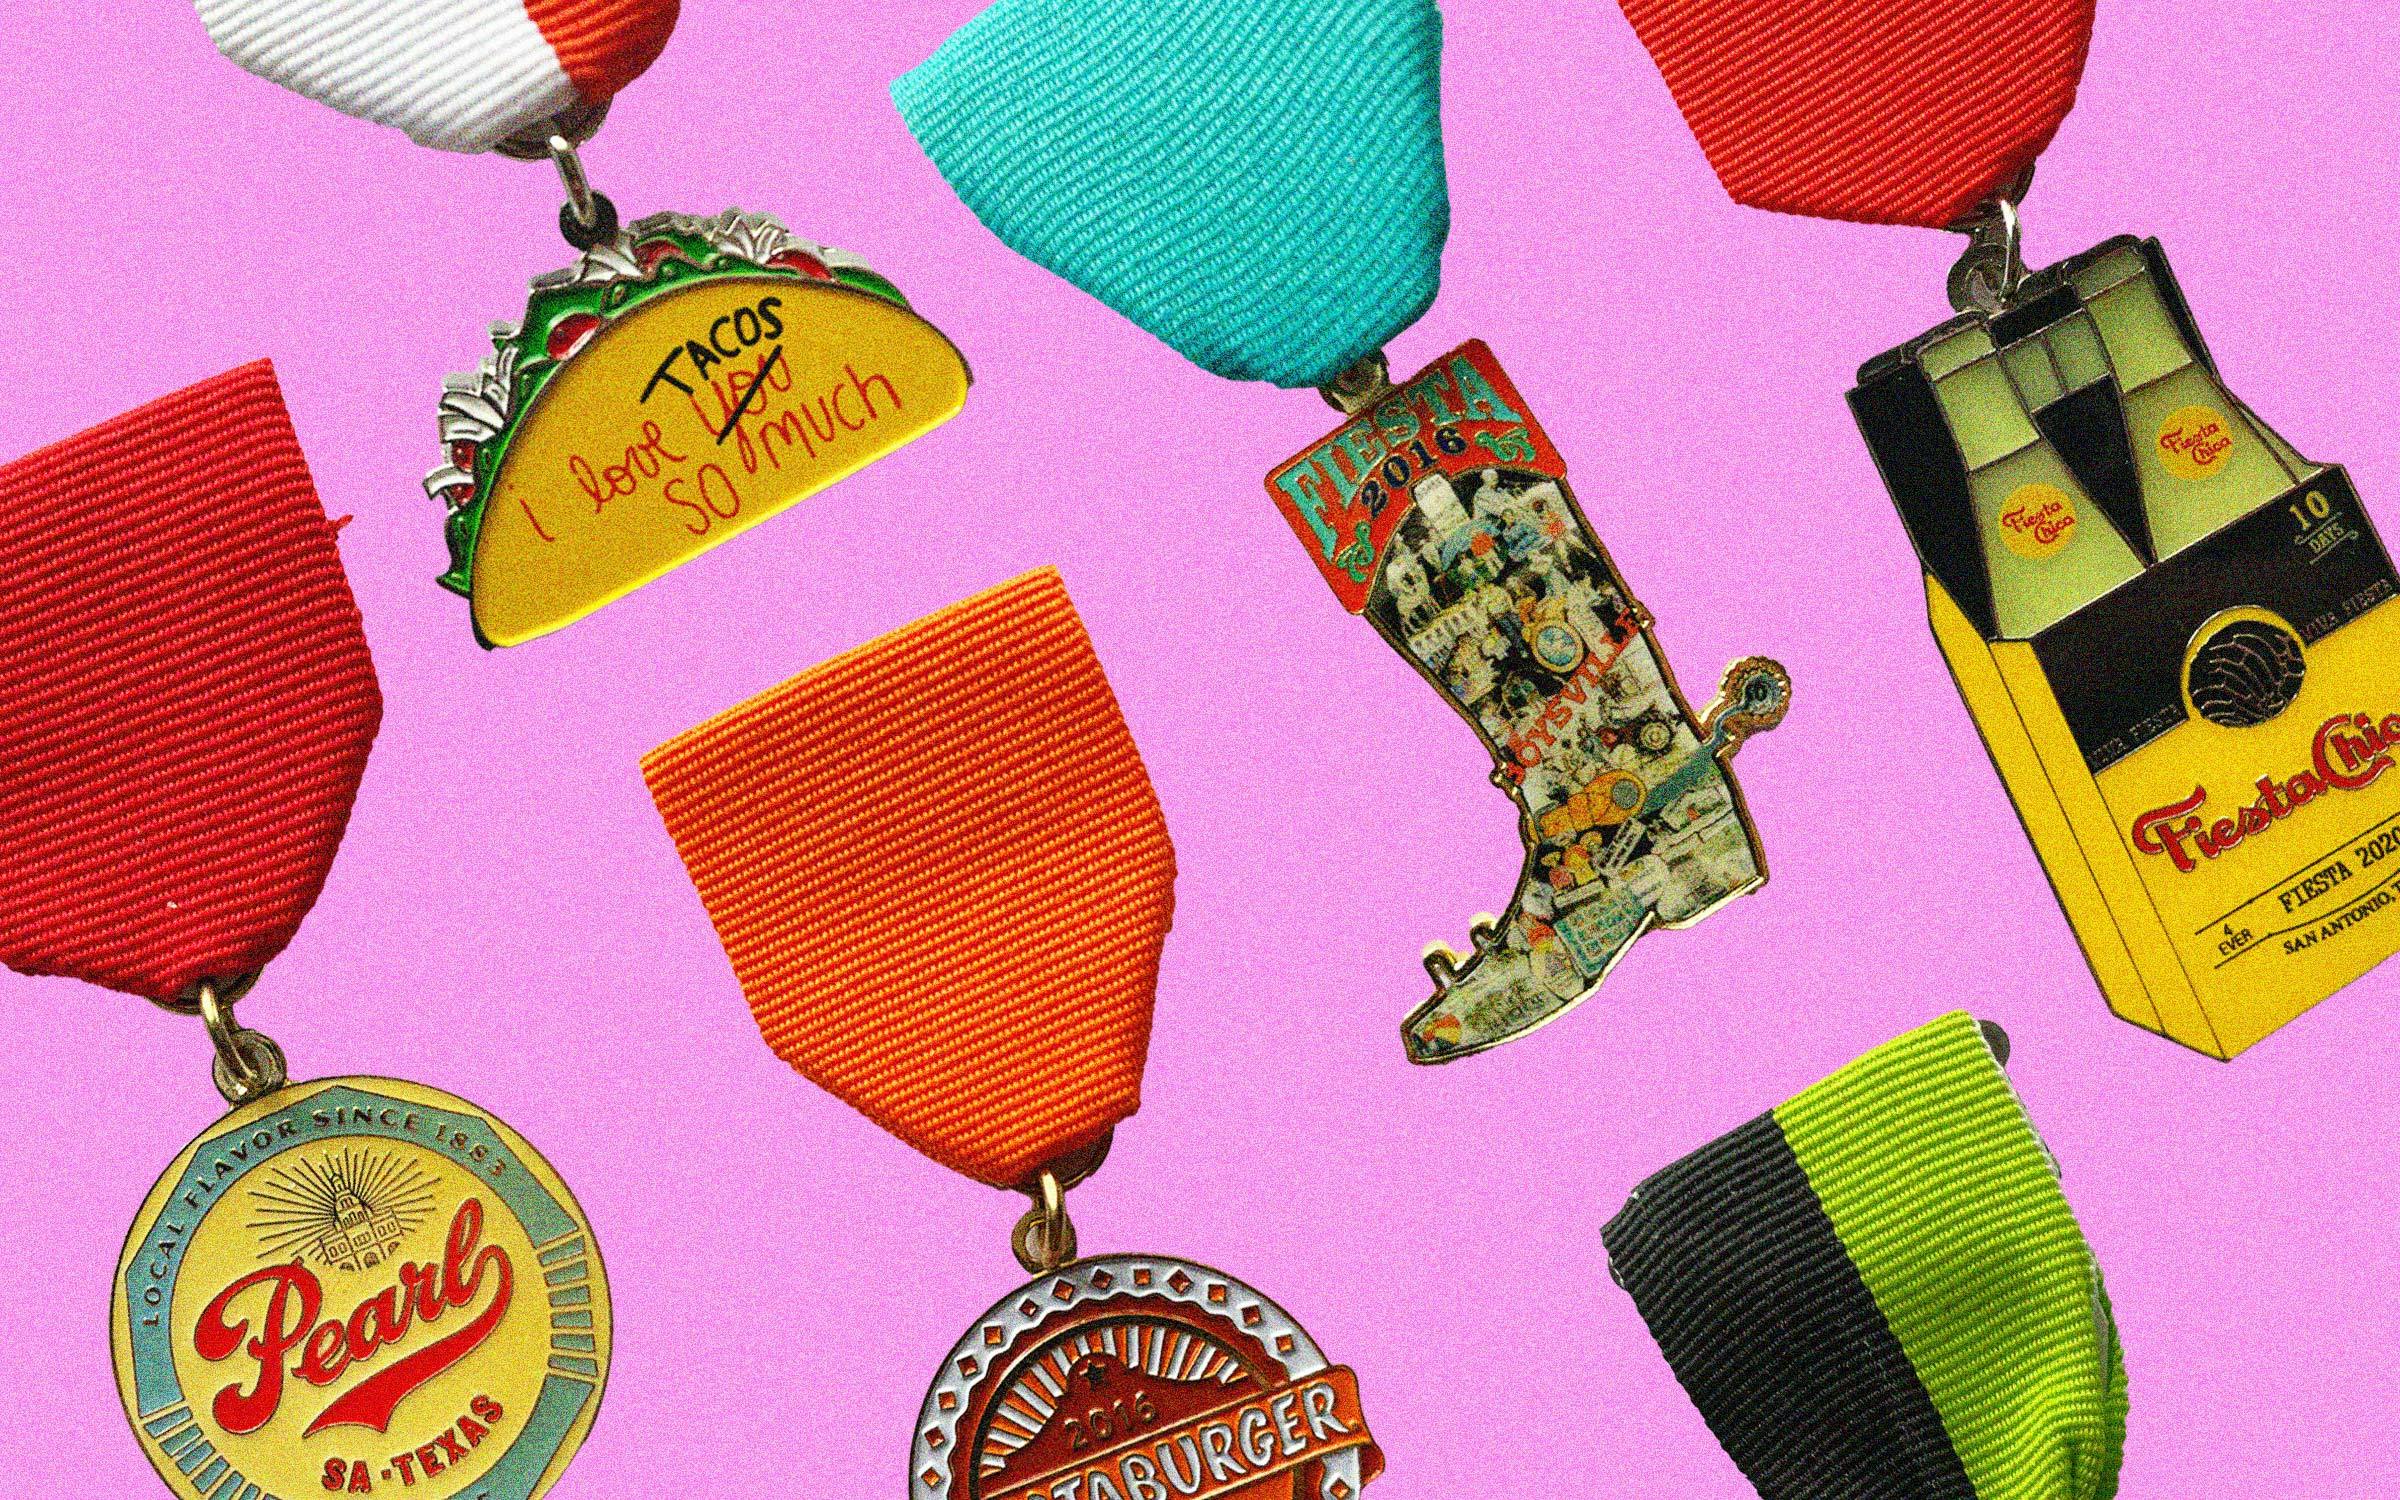 Spurs Fiesta-themed medals go on sale Wednesday